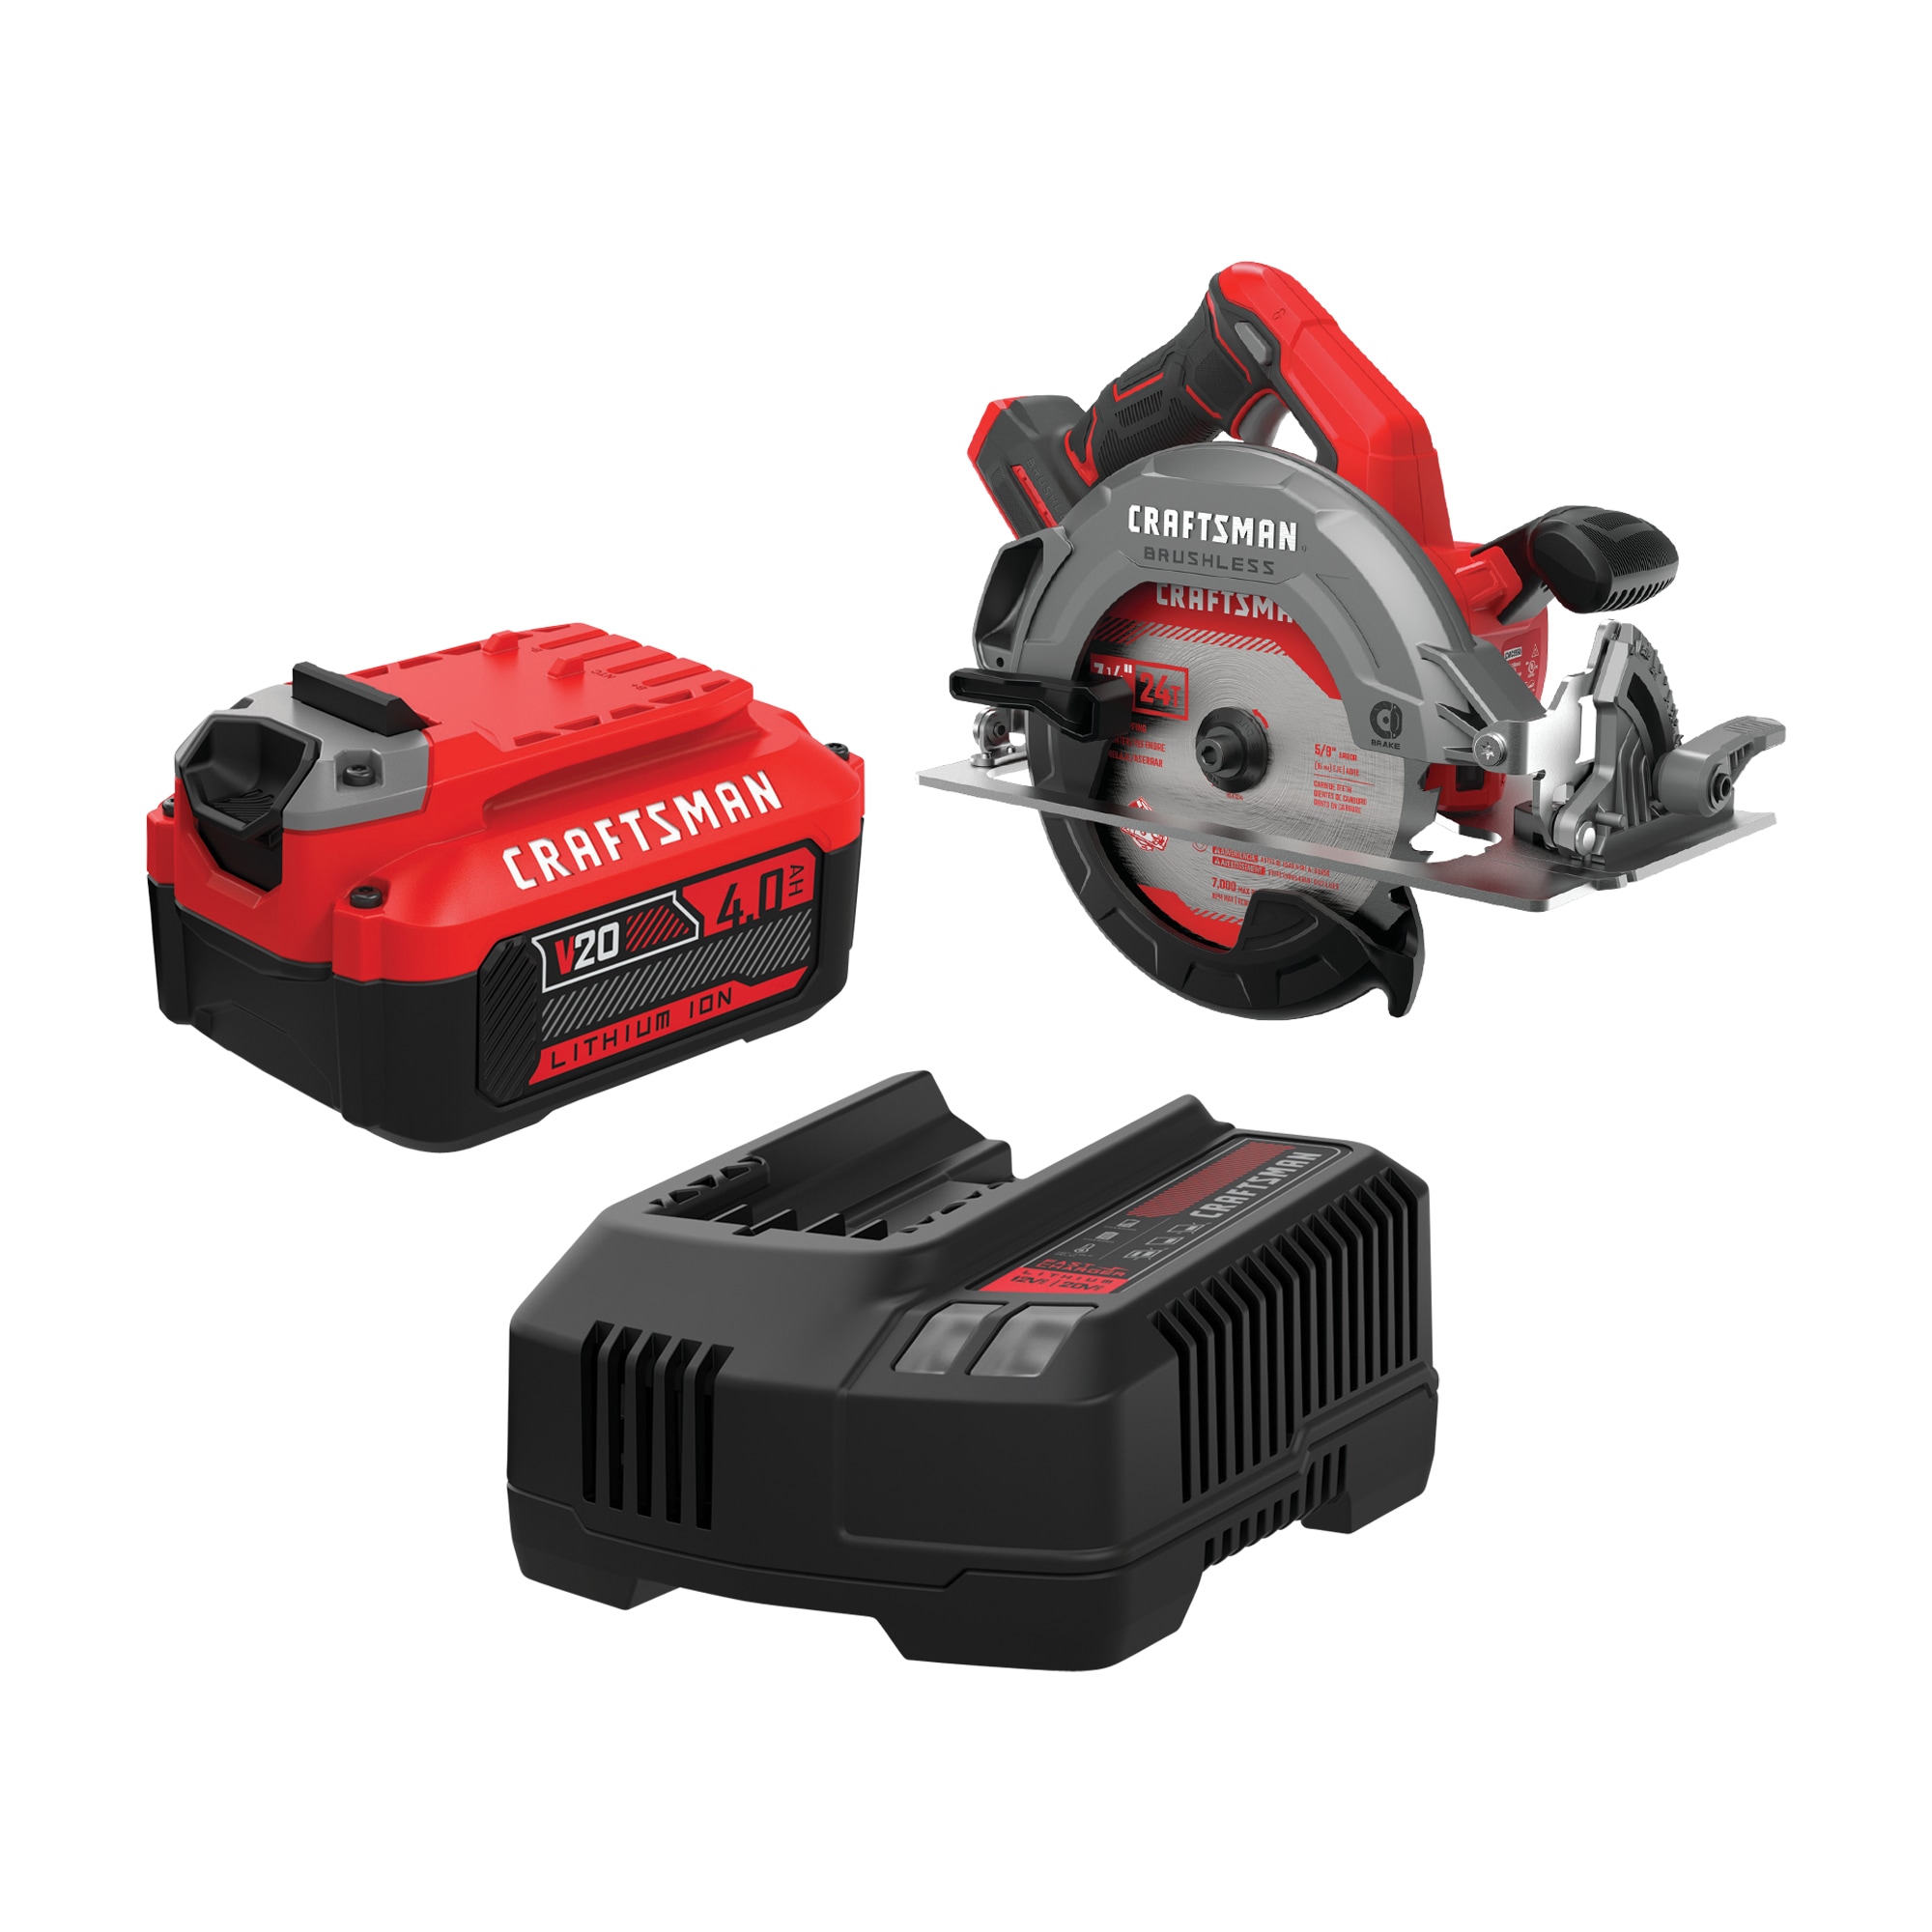 CRAFTSMAN V20 20-Volt Max 7-1/4-in Brushless Cordless Circular Saw & Power Tool Battery Kit (Included)